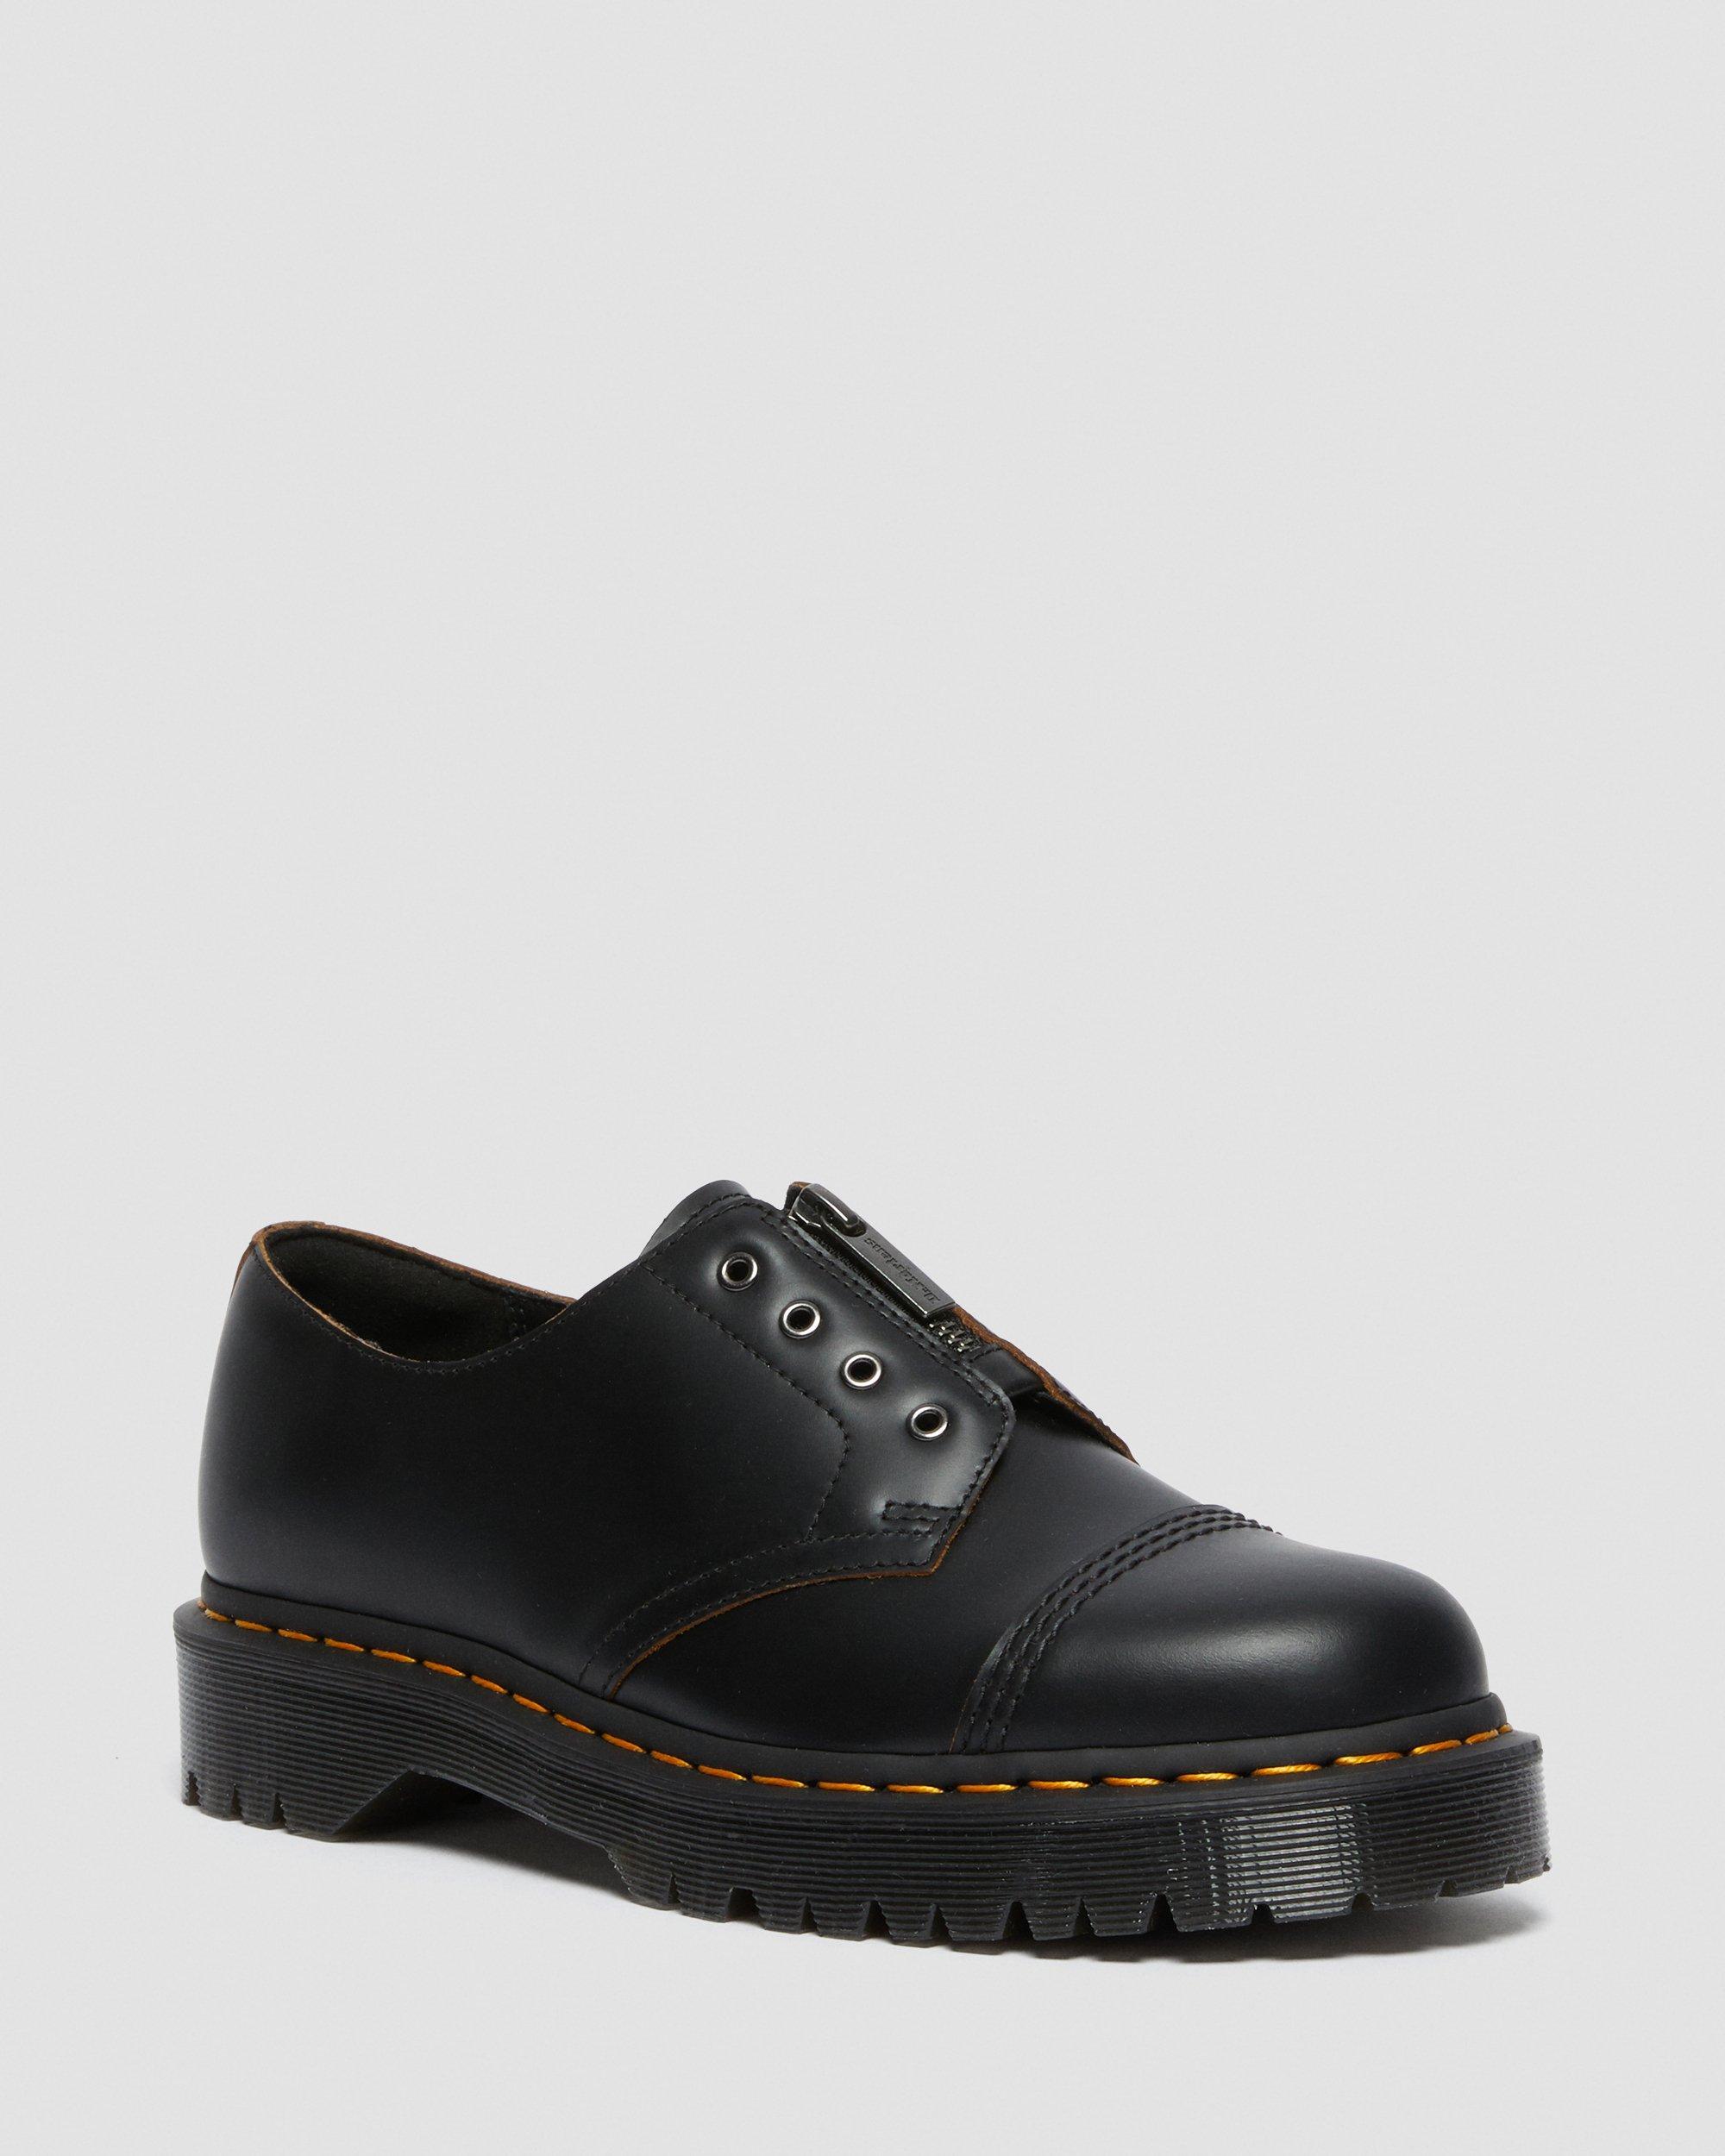 Dr. Martens Smiths Laceless Bex Leather Shoes in Black | Lyst